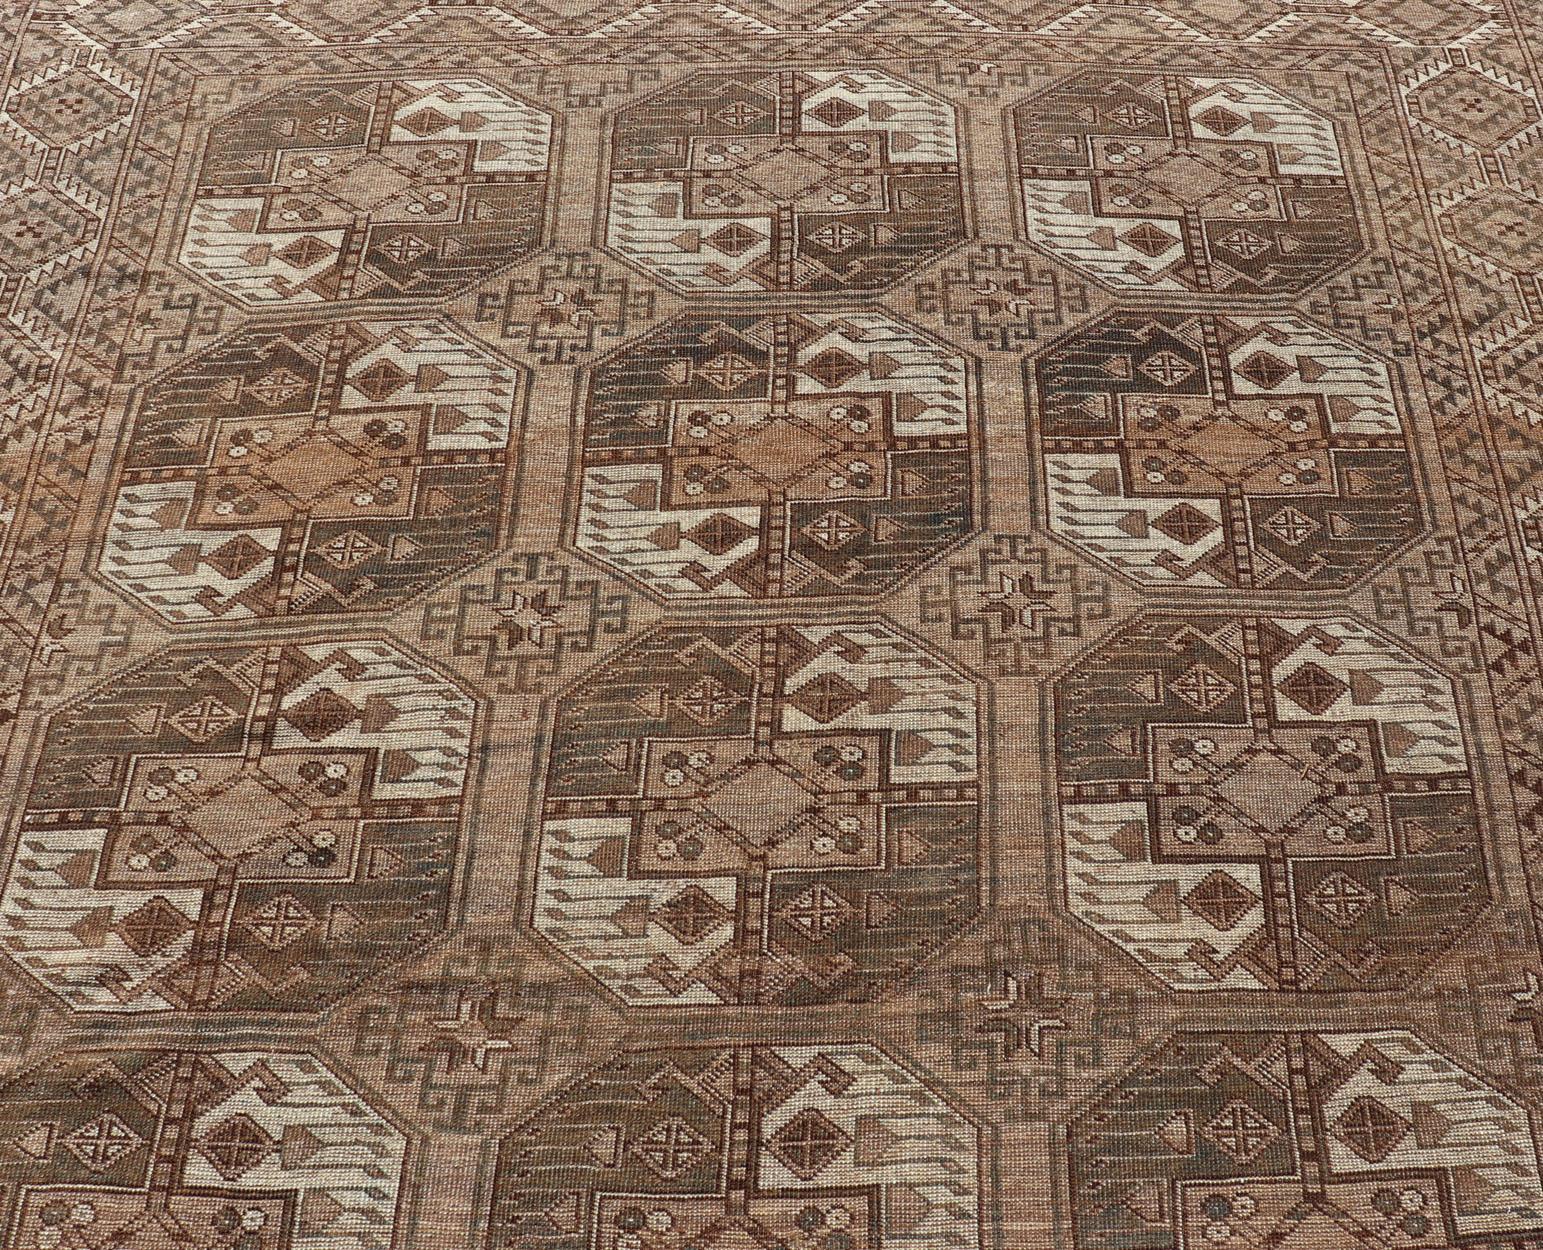 Islamic Hand-Knotted Turkomen Ersari Rug in Wool with All-Over Sub-Geometric Gul Design For Sale